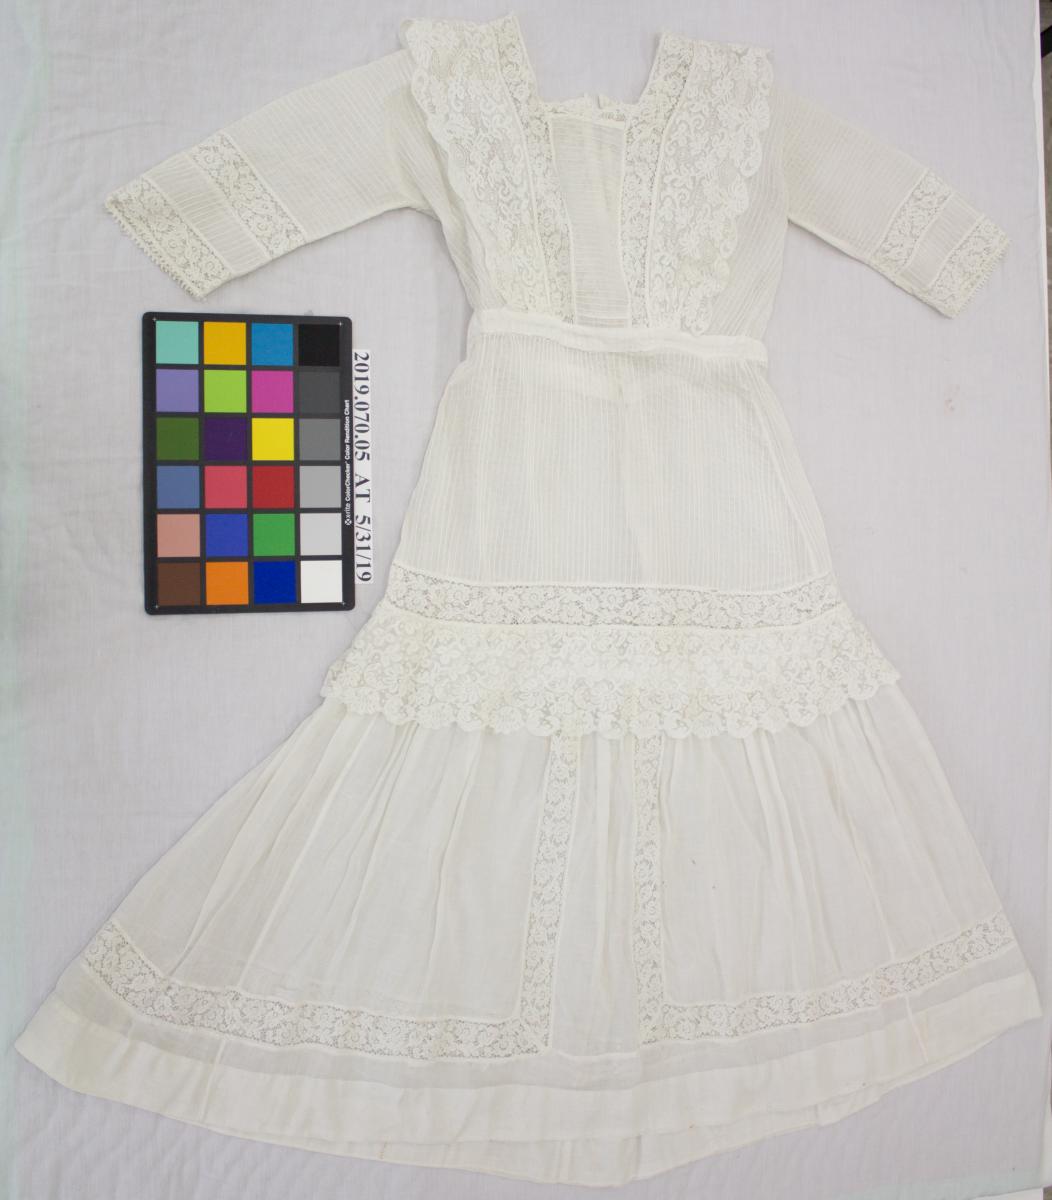 white cotton lace dress, after treatment, notably whiter